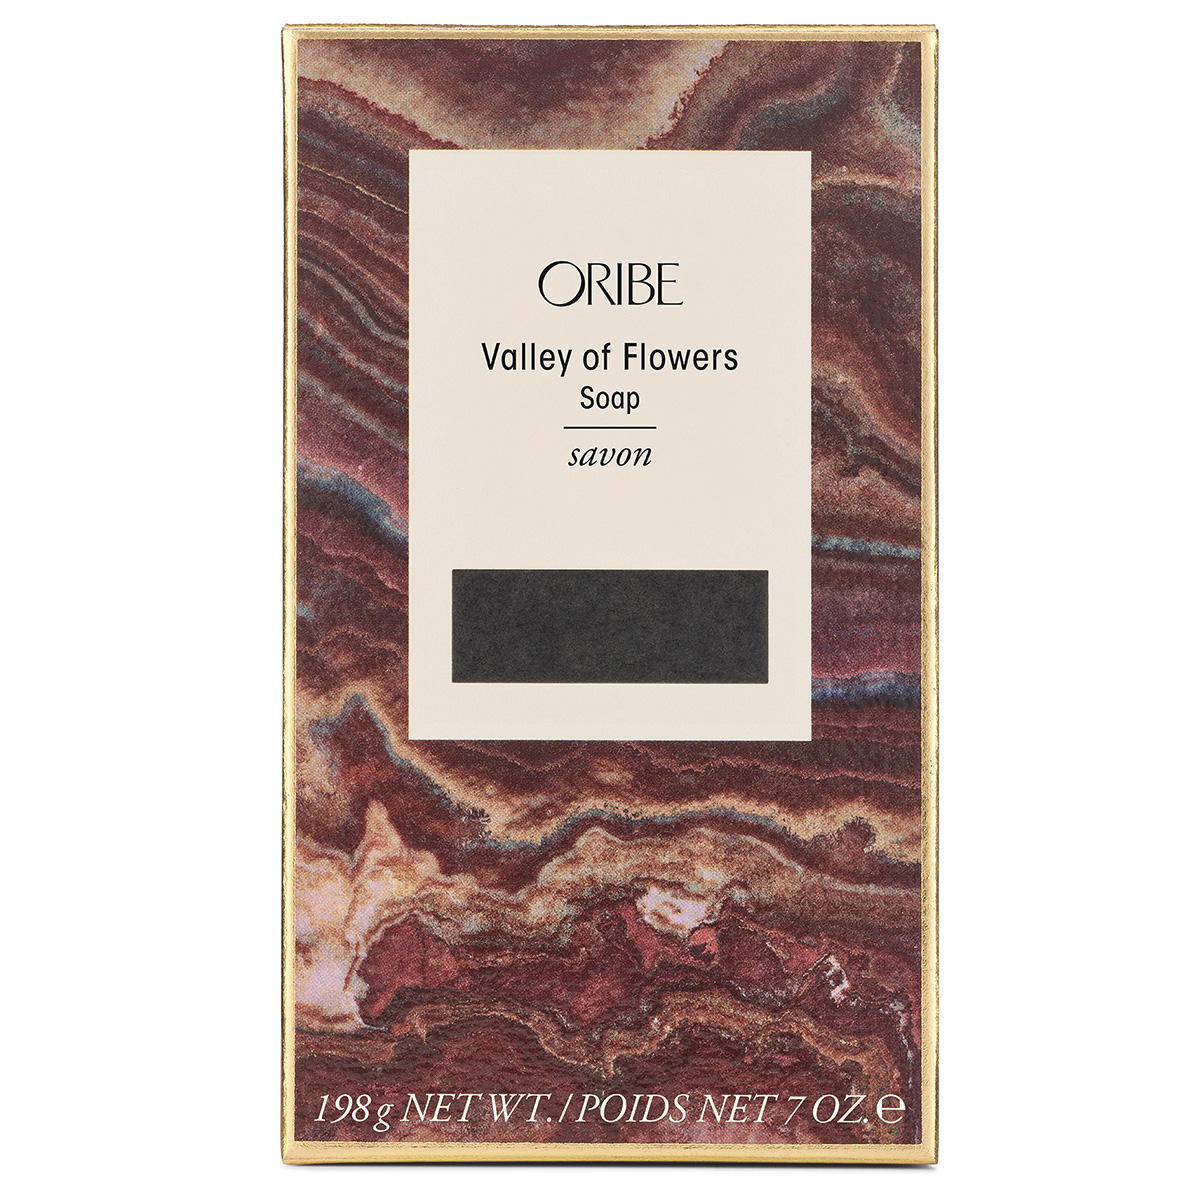 Oribe Valley of Flowers Bar Soap 198 g - 1